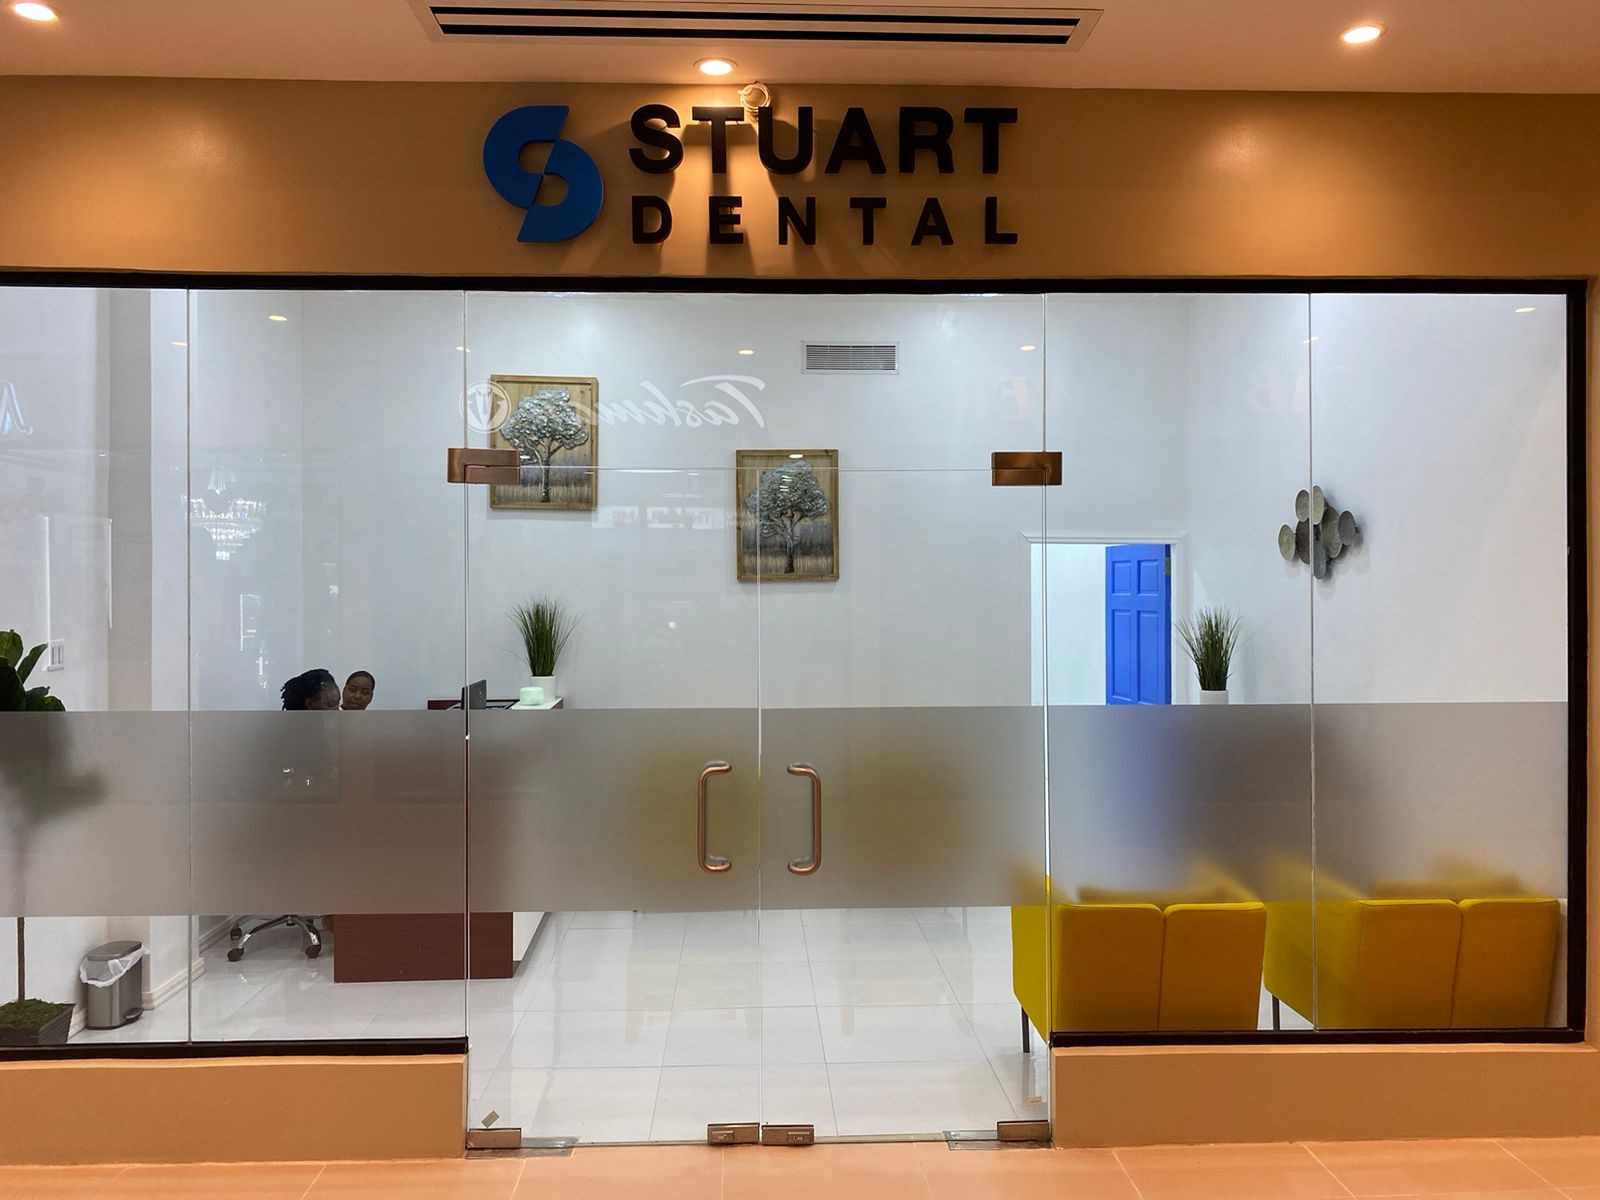 Member Achievement: Stuart Dental Expands its operations with new Amazonia Mall location